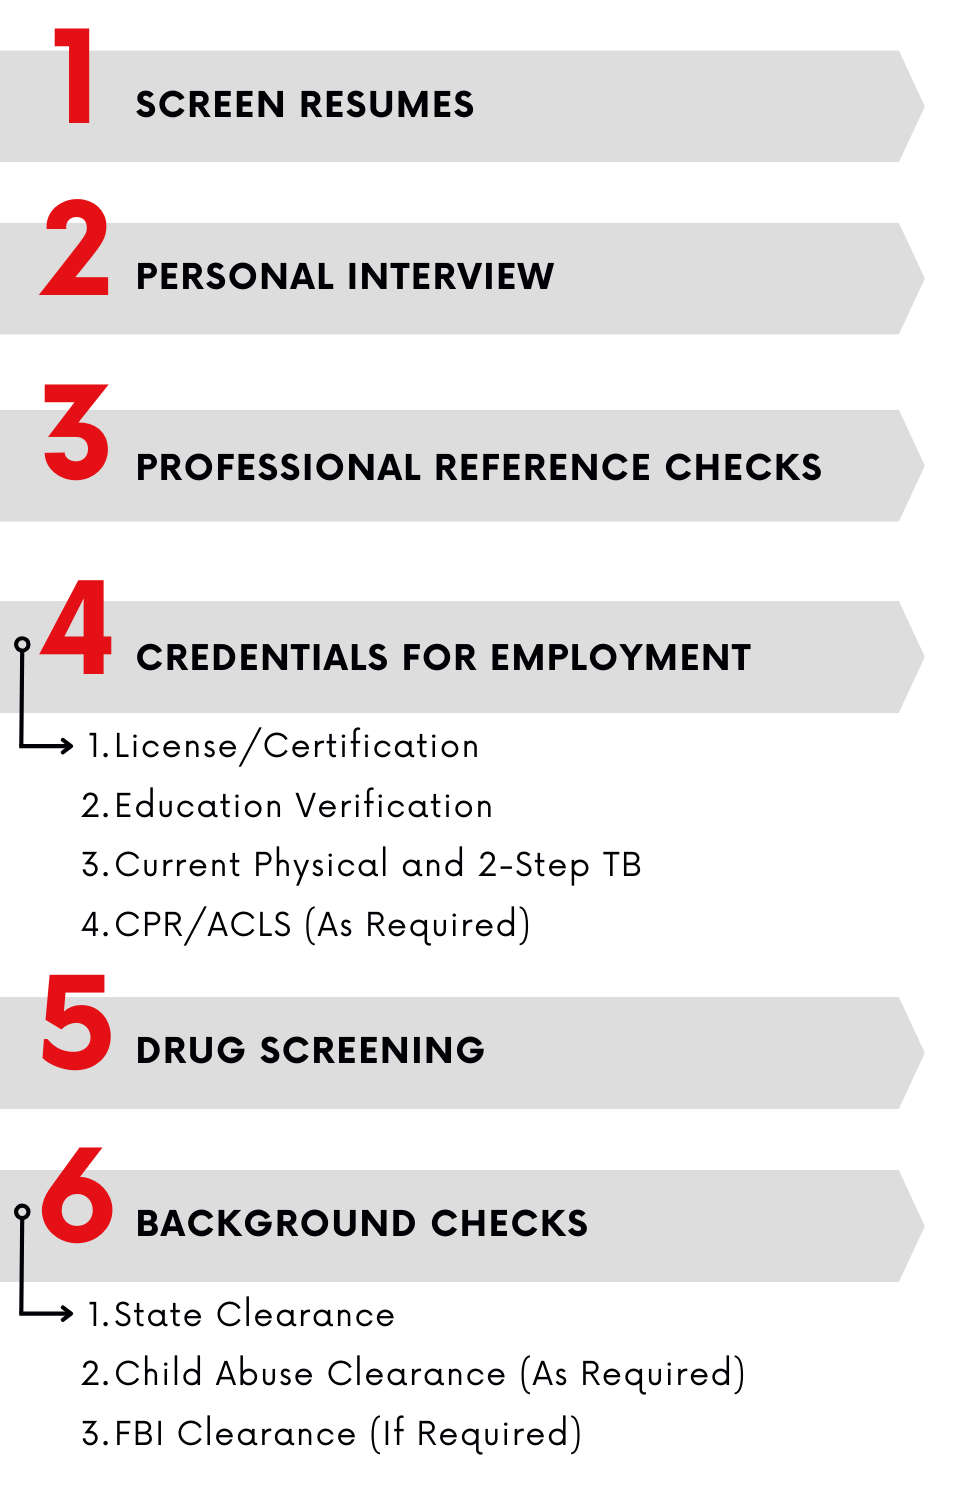 1. Screen Resumes 2. Personal Interview 3. Professional Reference Checks 4. Credentials For Employment 5. Drug Screening 6. Background Checks